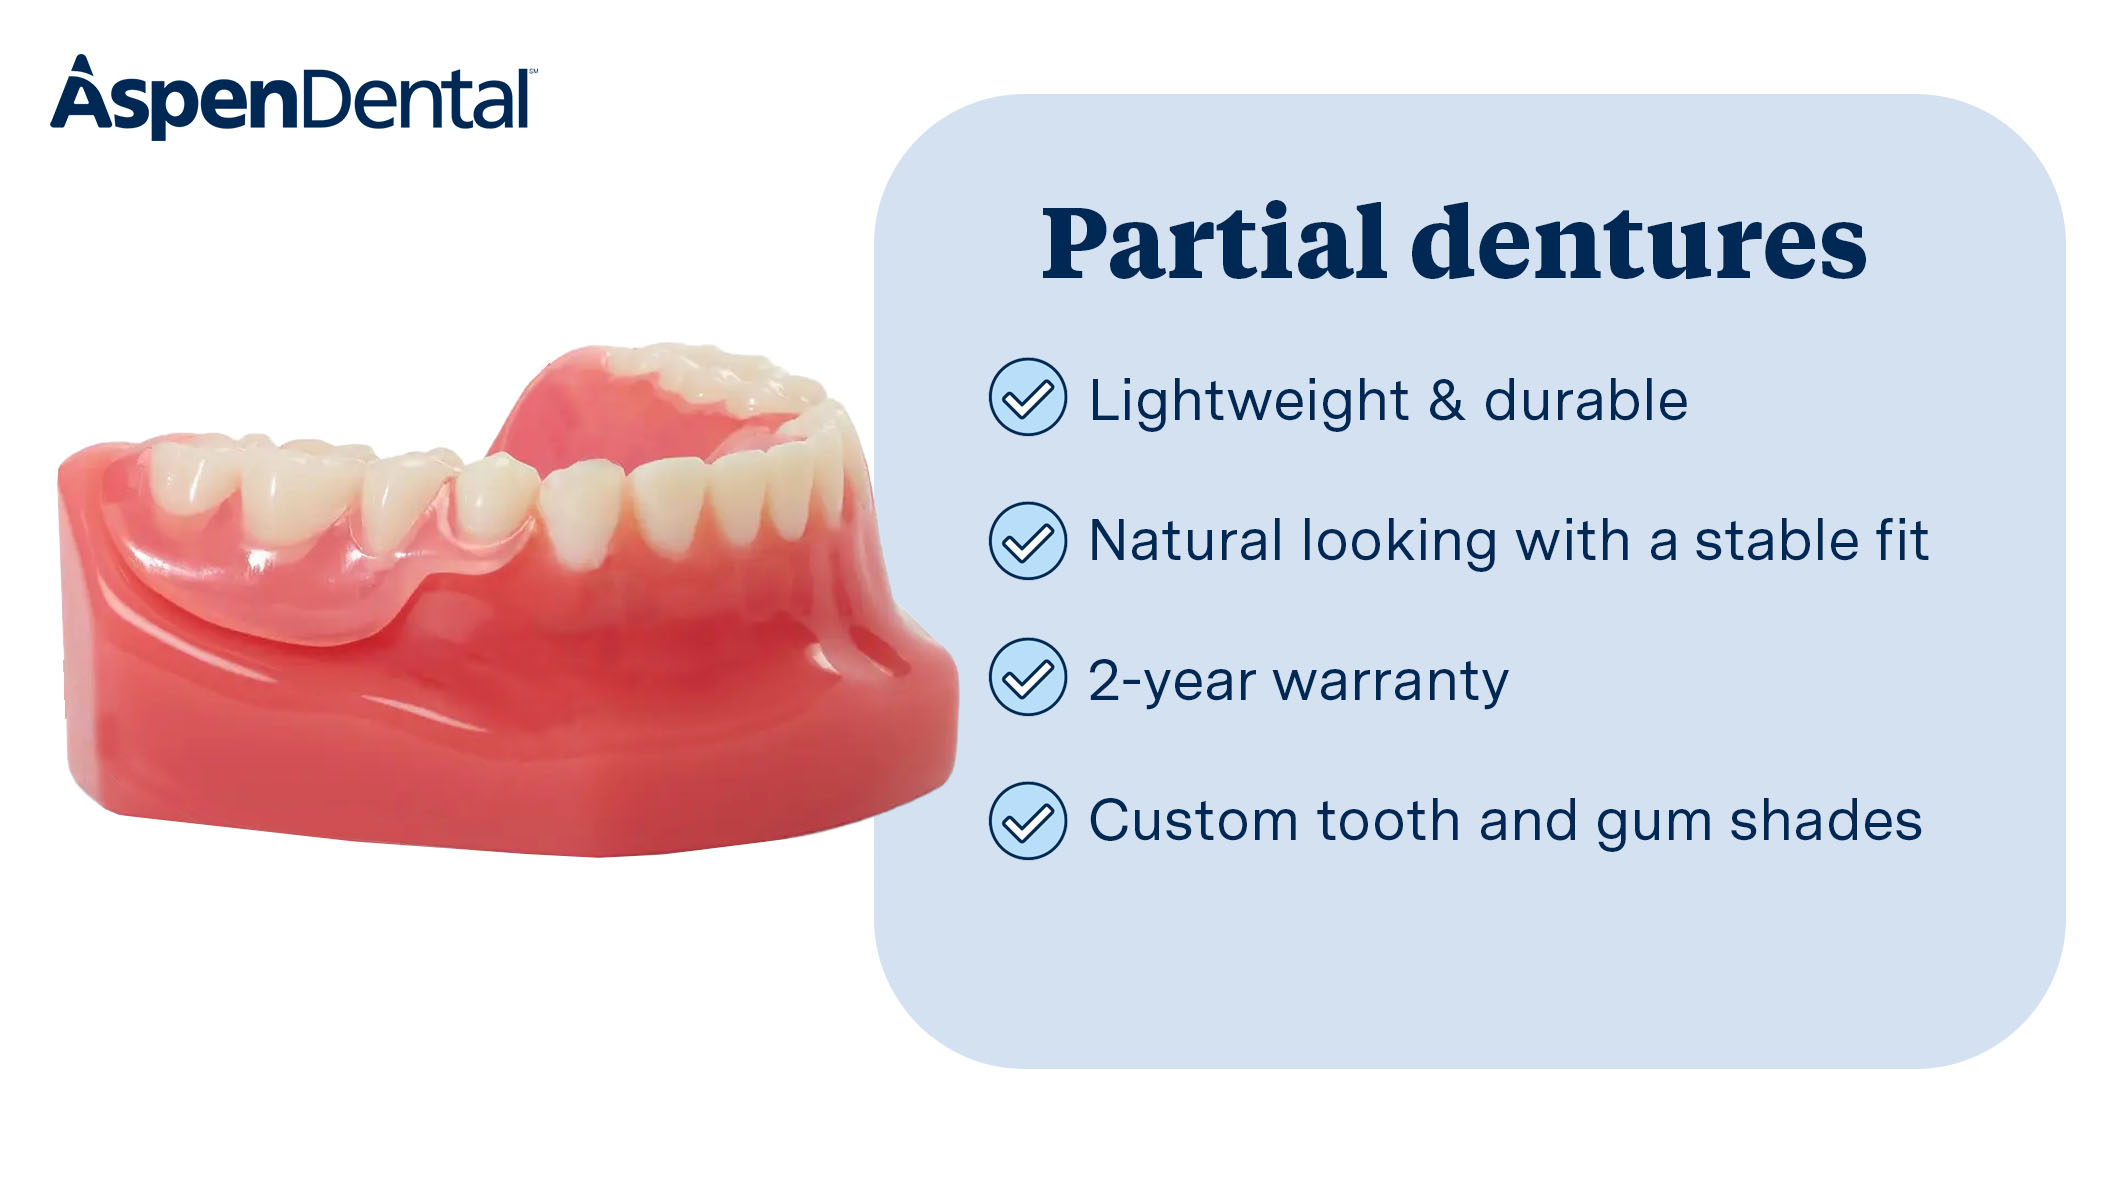 Restore your smile with our customizable partial dentures. Lightweight, durable, natural-looking, and they're designed for a comfortable fit.